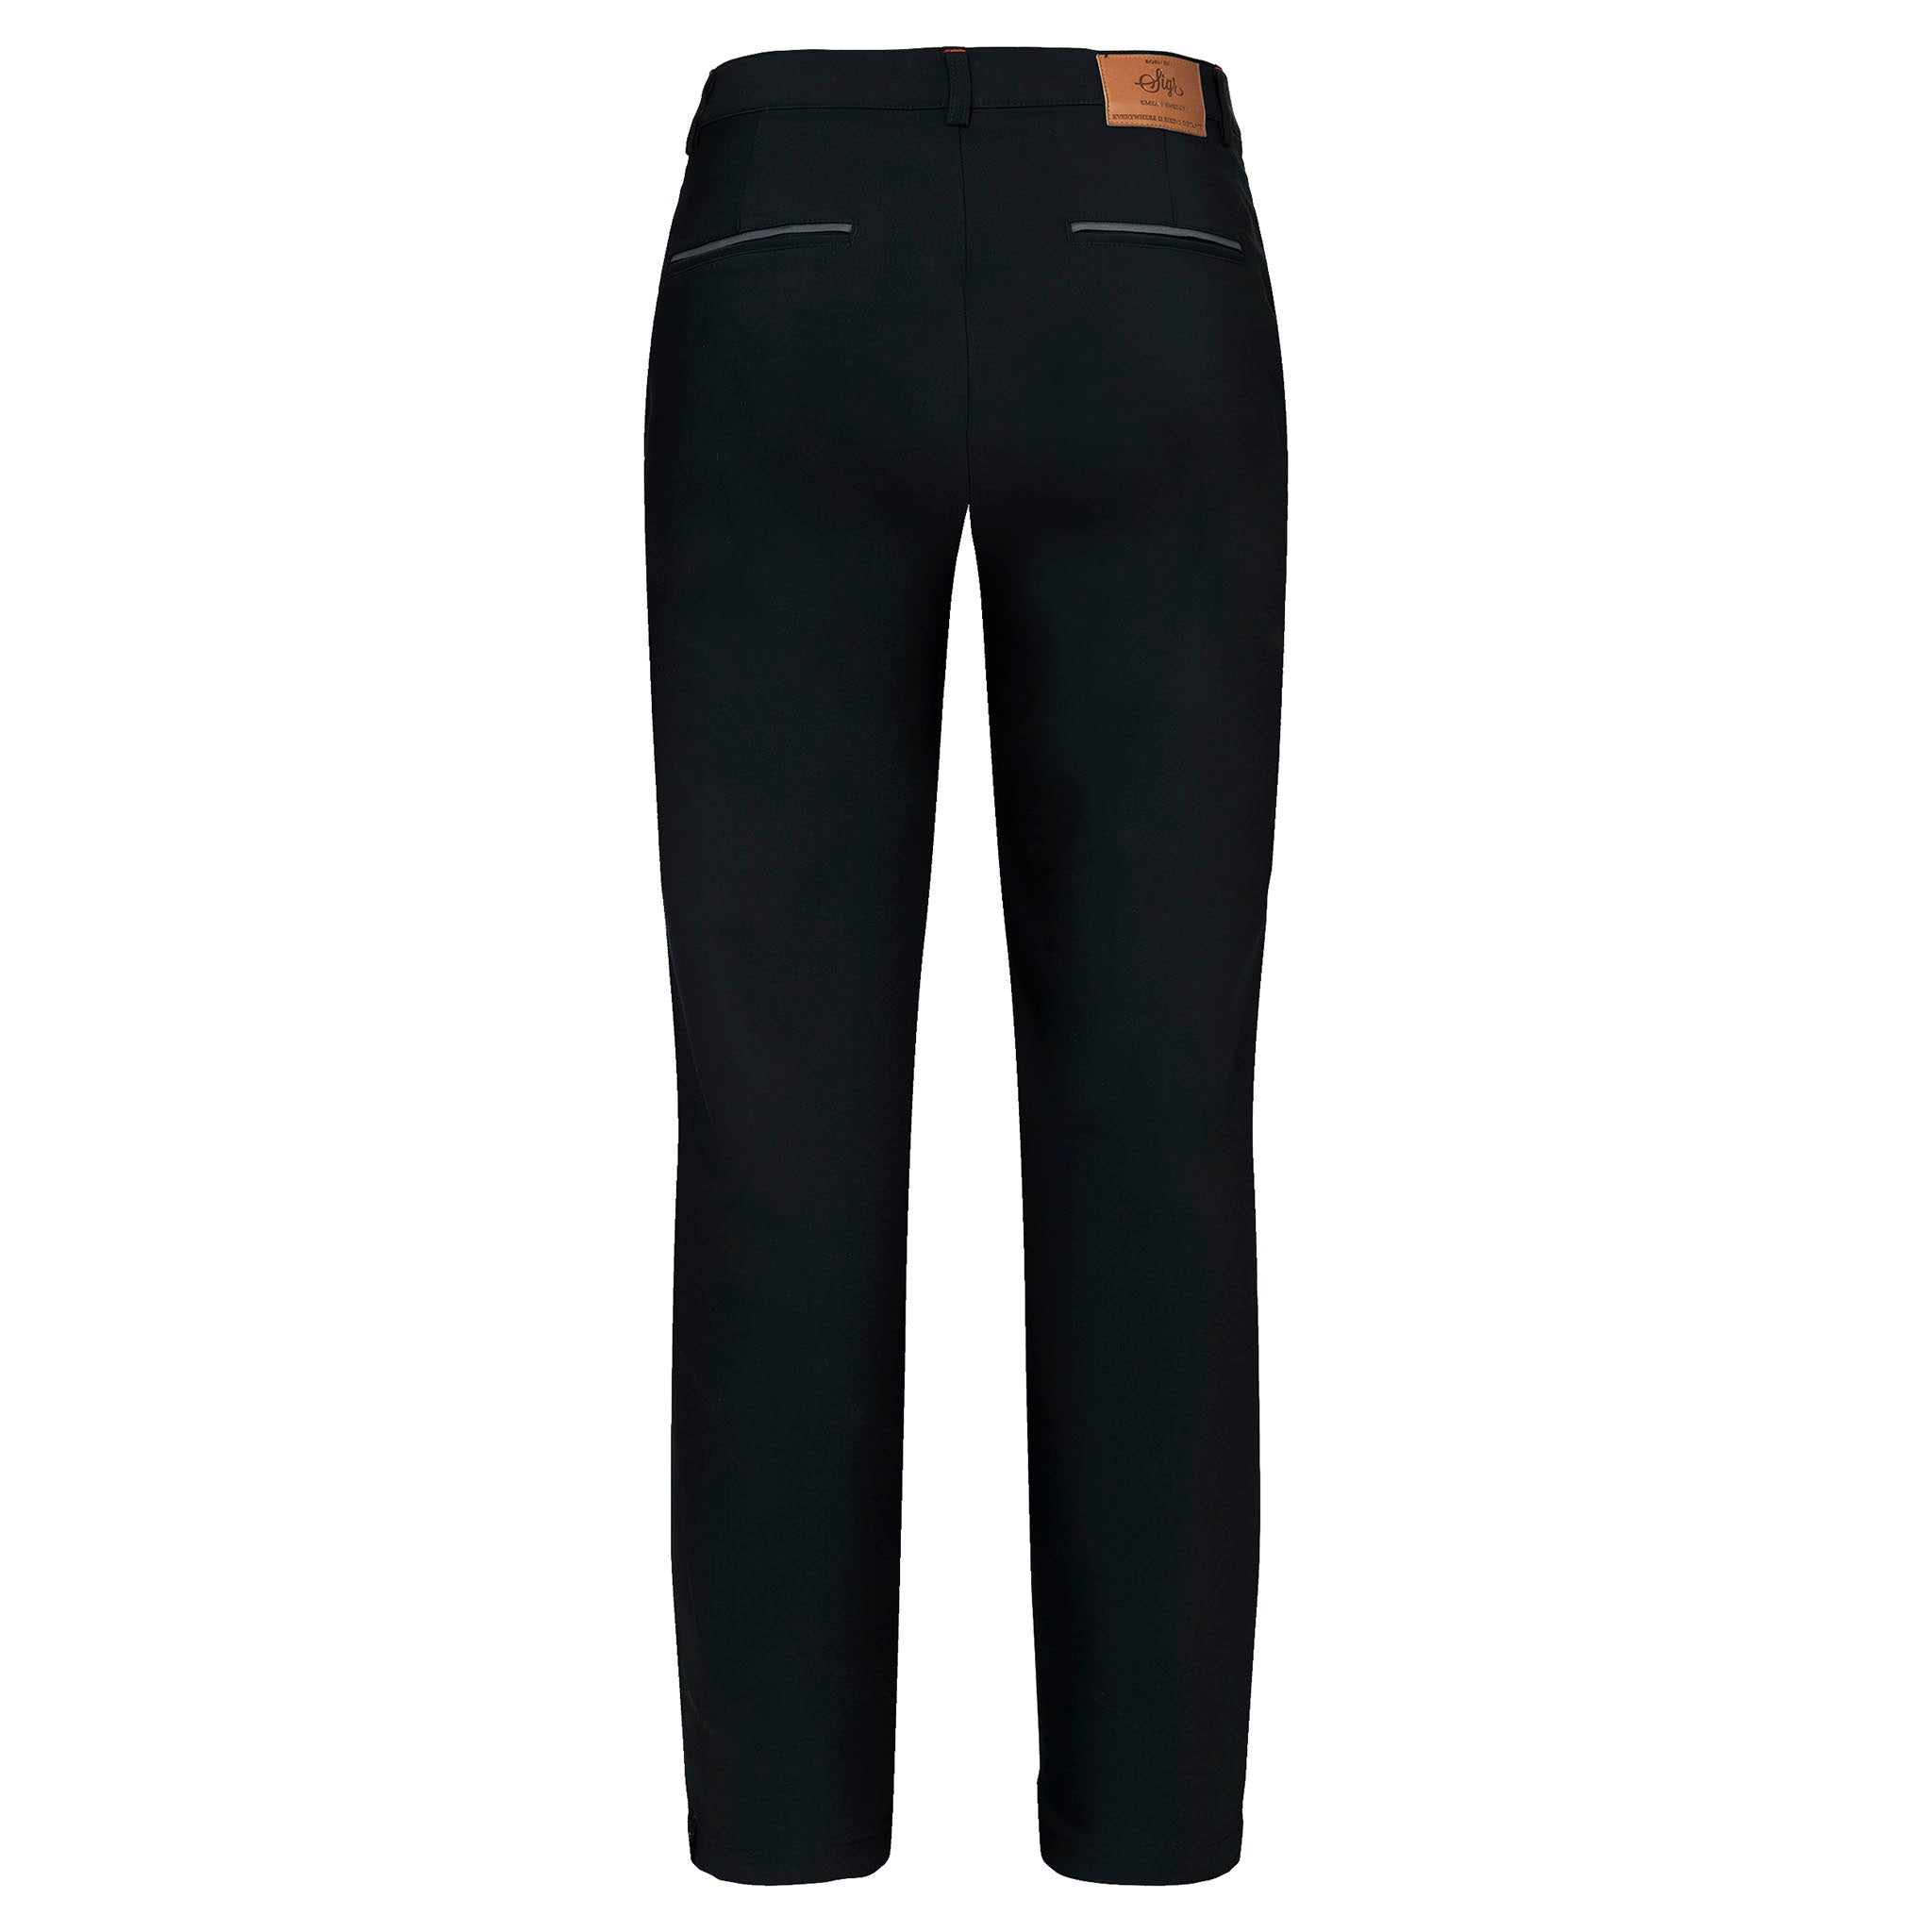 Riksvag 99 - Road Cycling Chinos in Black for Women